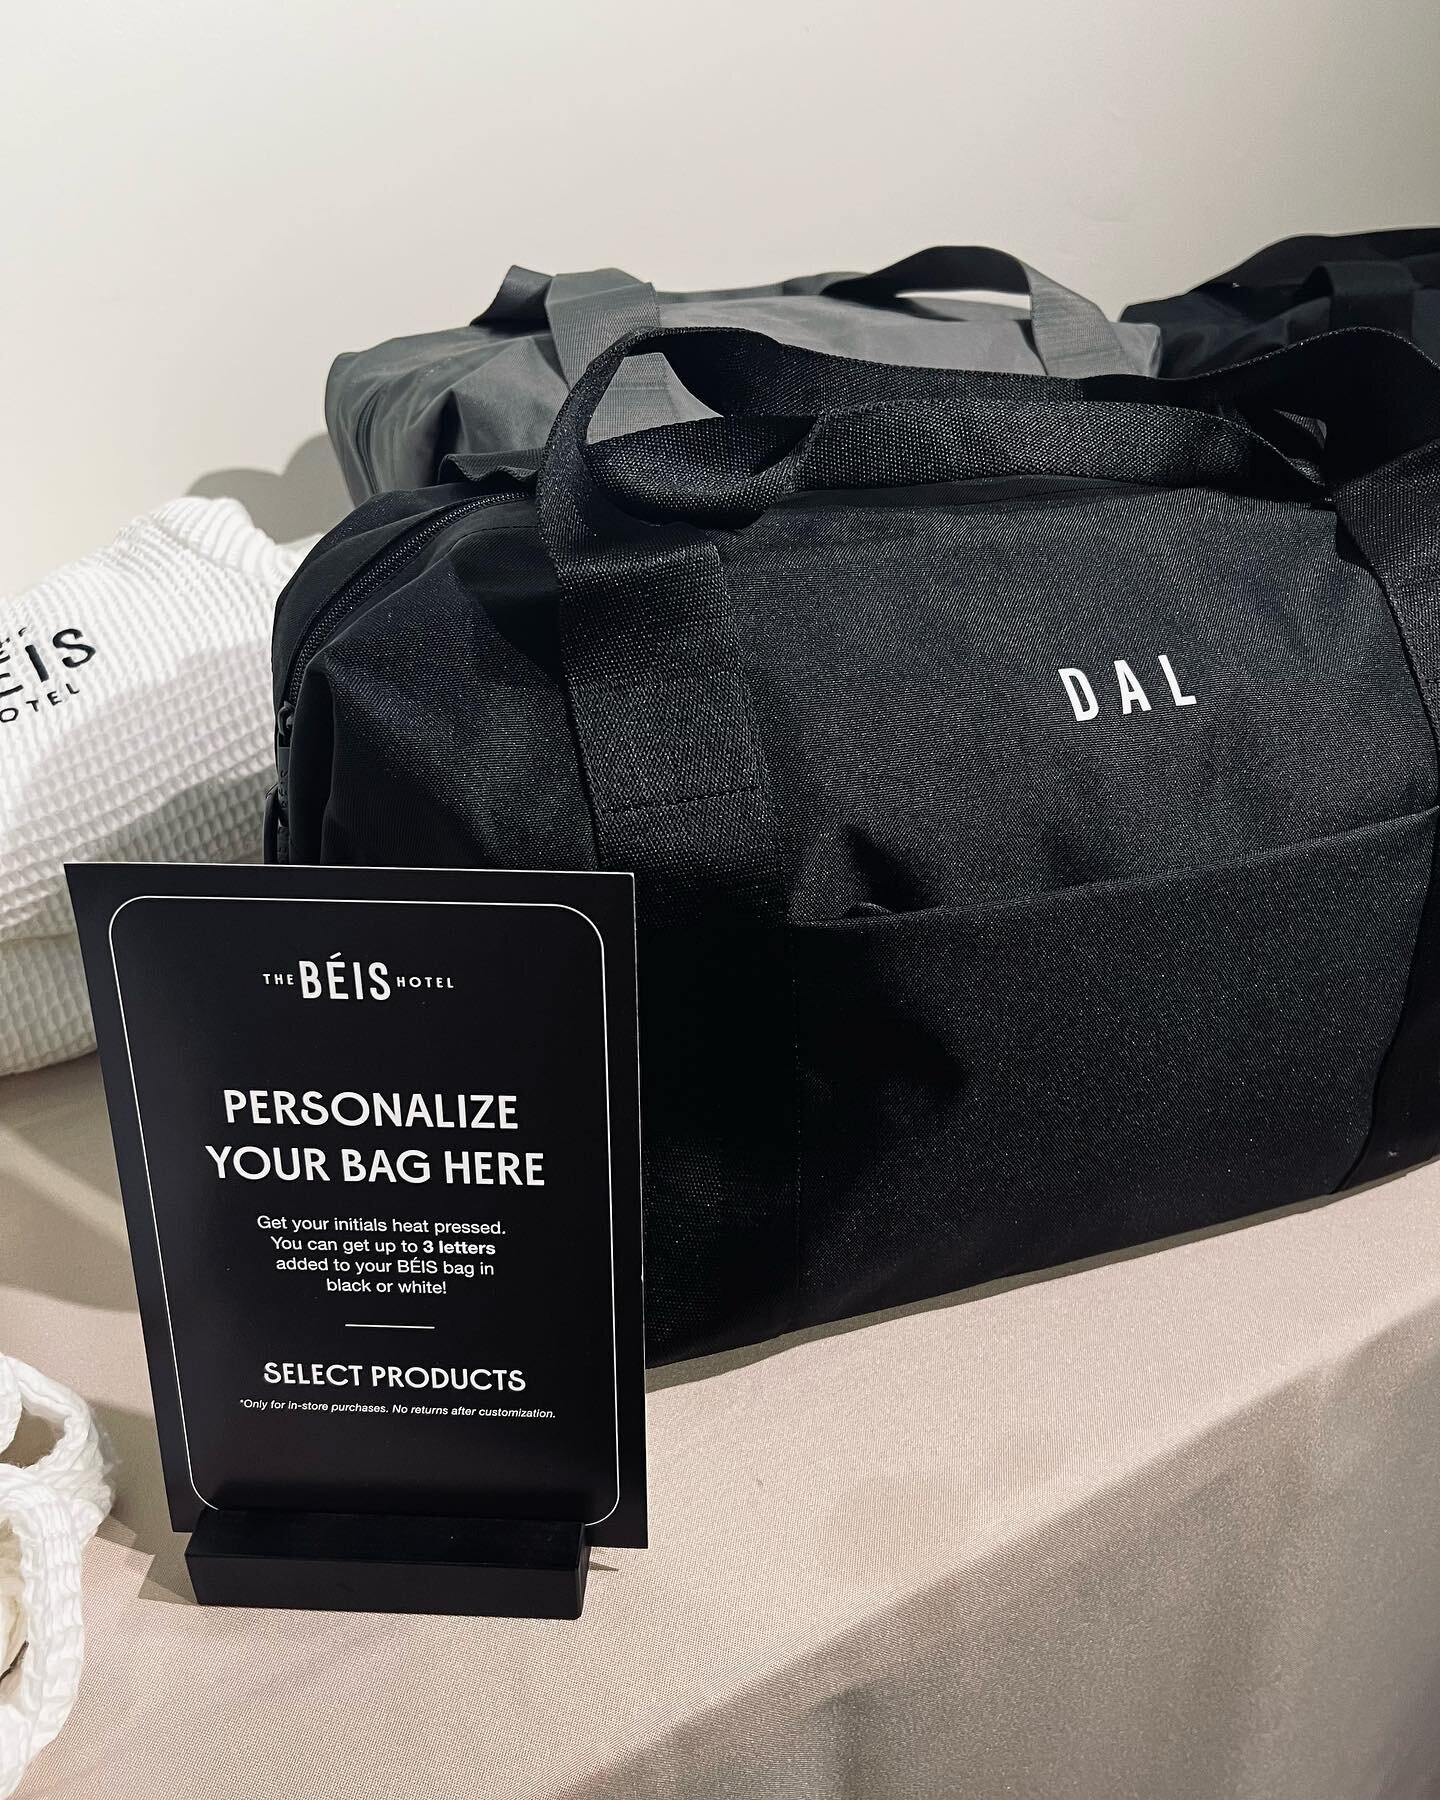 Check out our latest event at the @beis hotel pop-up in Dallas! Jet-setters got to personalize their travel bags at our onsite monogramming station, sip cocktails, and shop in the cutest faux hotel. 
.
.
.
#livemonogramming #eventactivations #onsitem